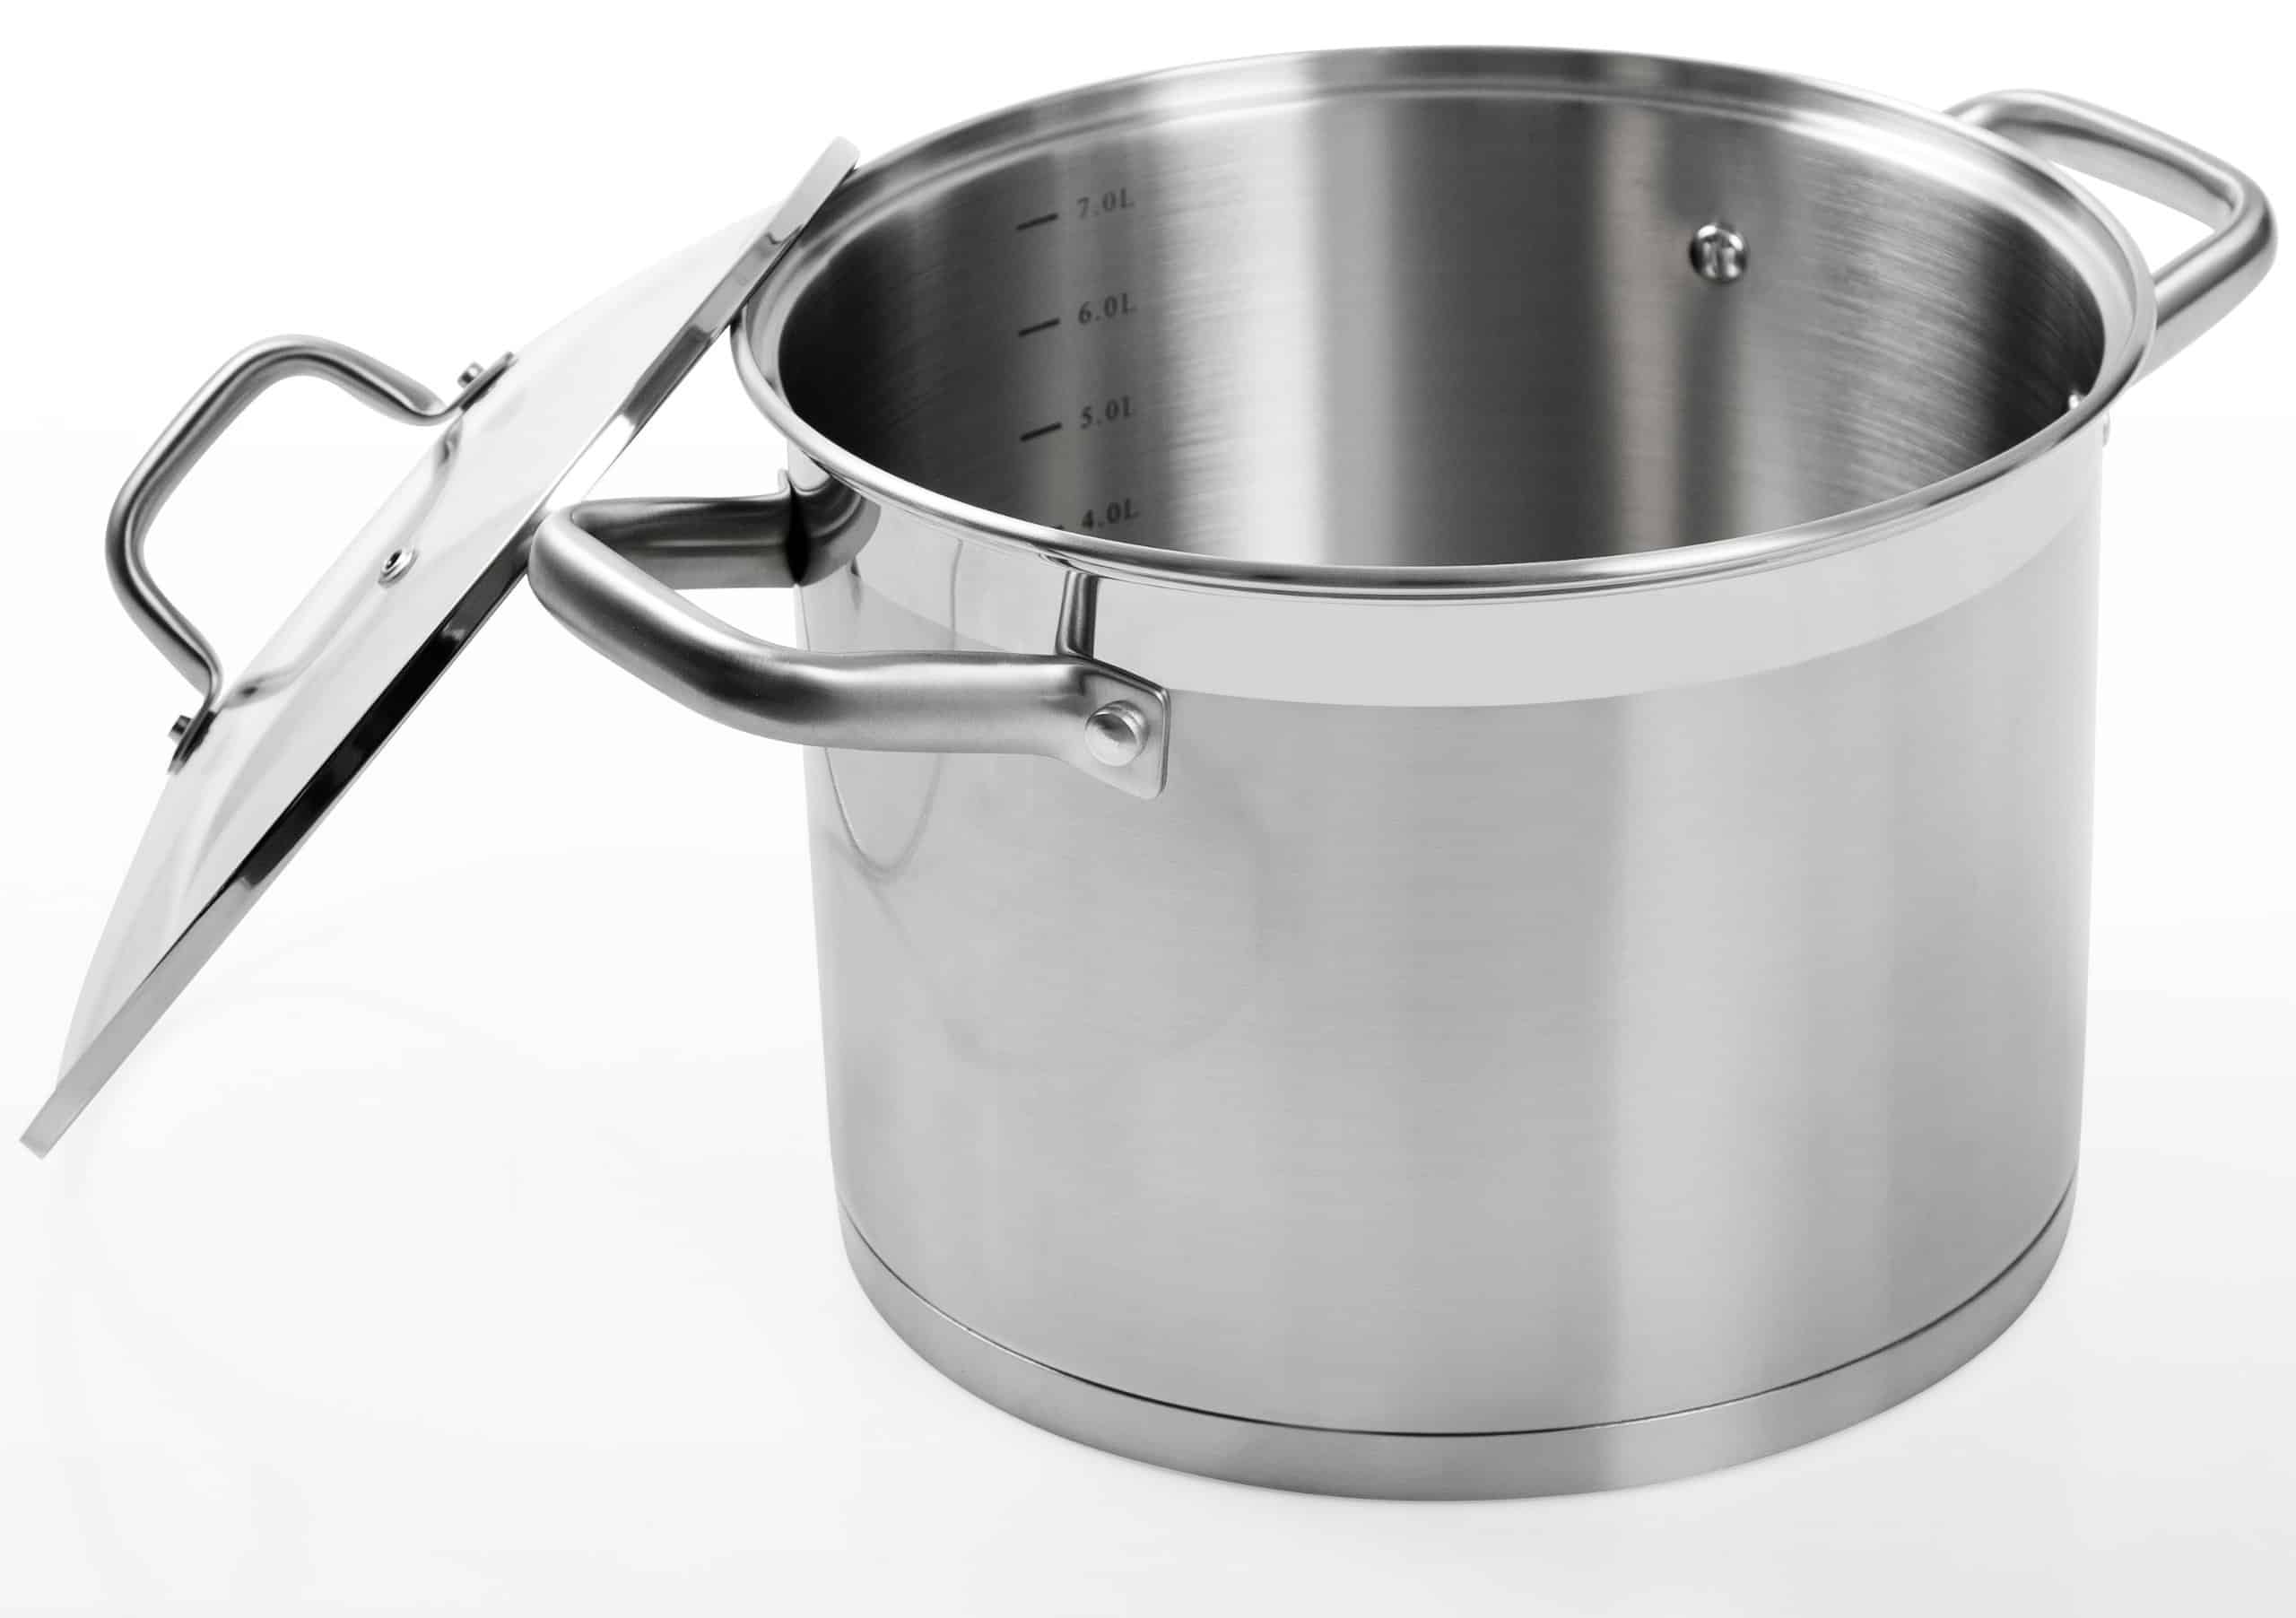 stock pot with lid showing the quanity markings inside the pan